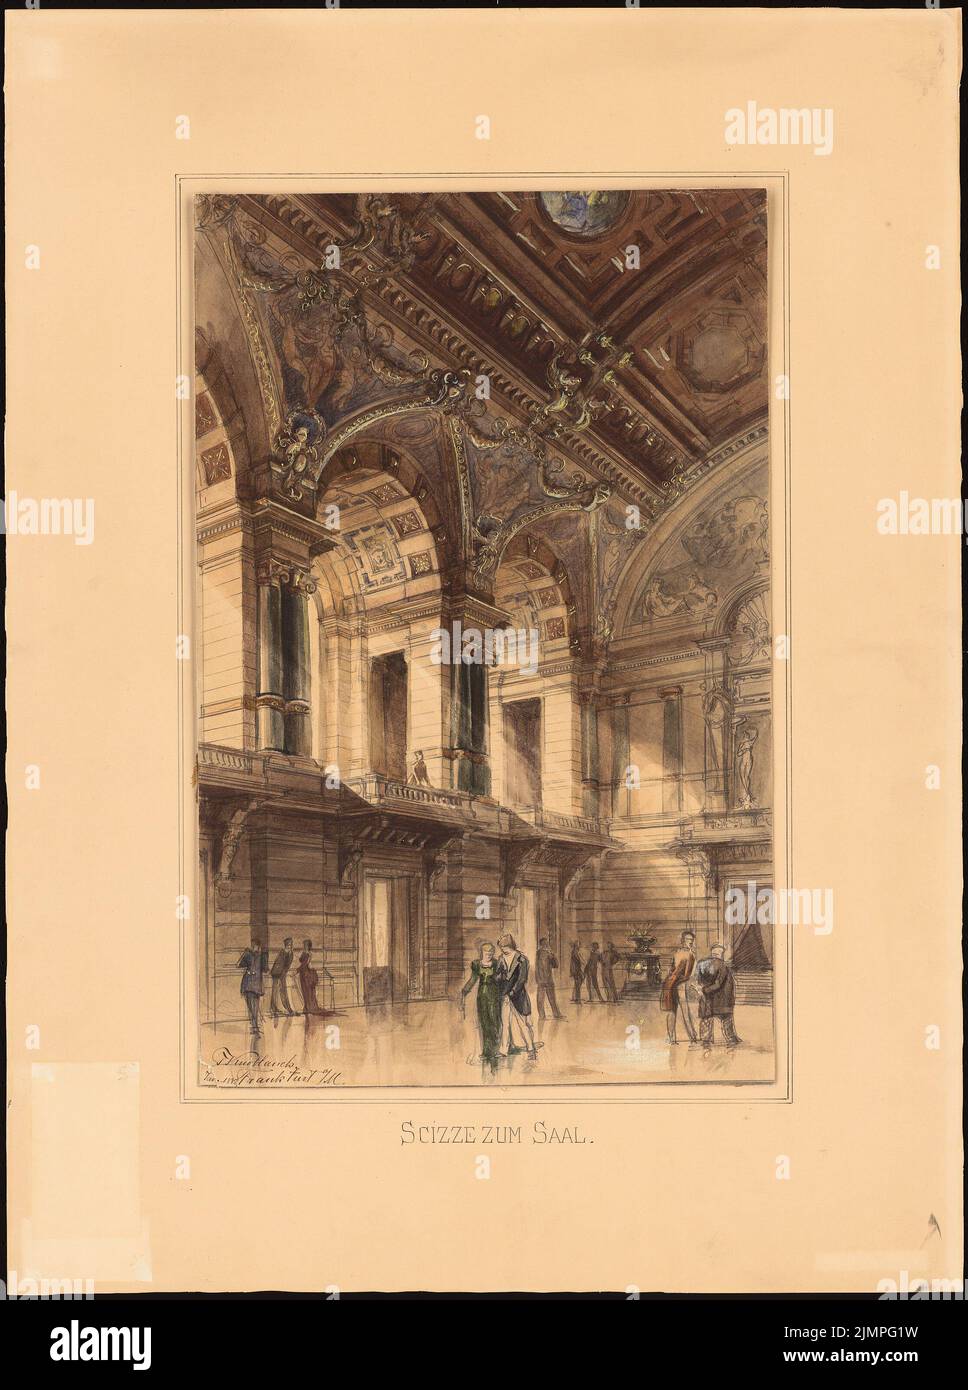 Knoblauch Julius, Kurhaus (1882): Perspective inner view. Pencil watercolor, white heighted on the cardboard, 78.2 x 58.2 cm (including scan edges) Knoblauch Julius : Kurhaus Stock Photo